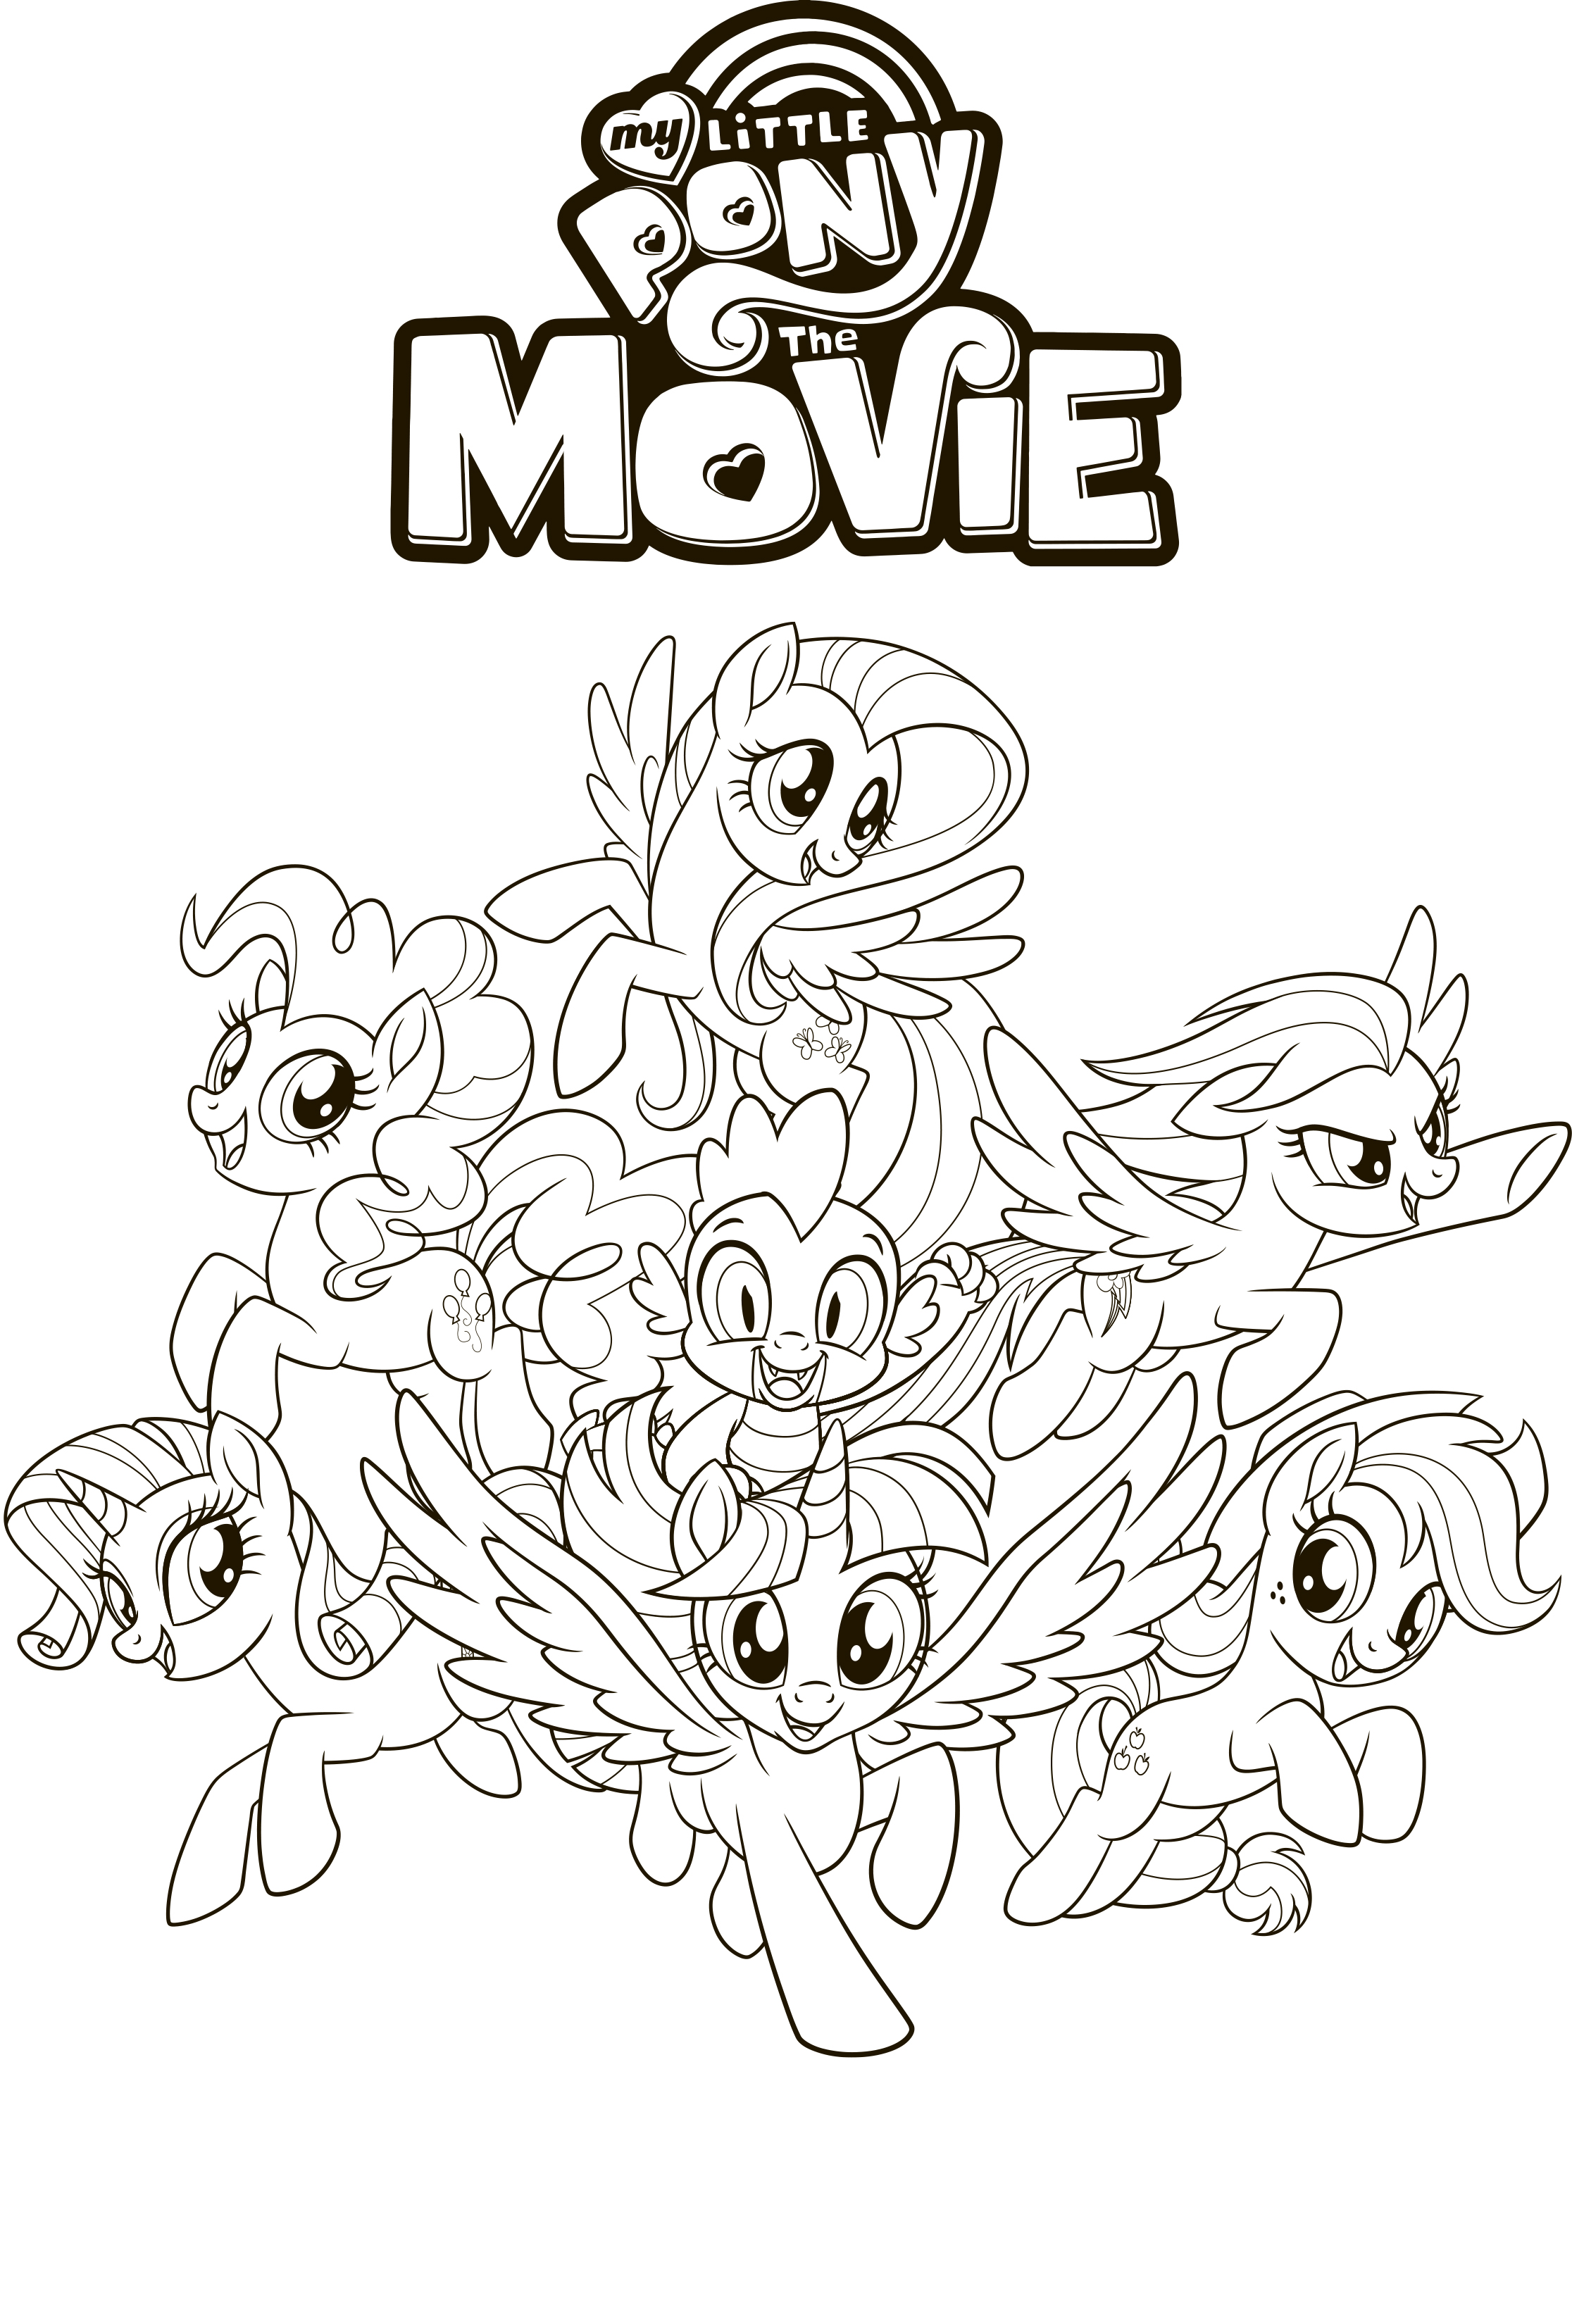 My Little Pony The Movie coloring pages   YouLoveIt.com